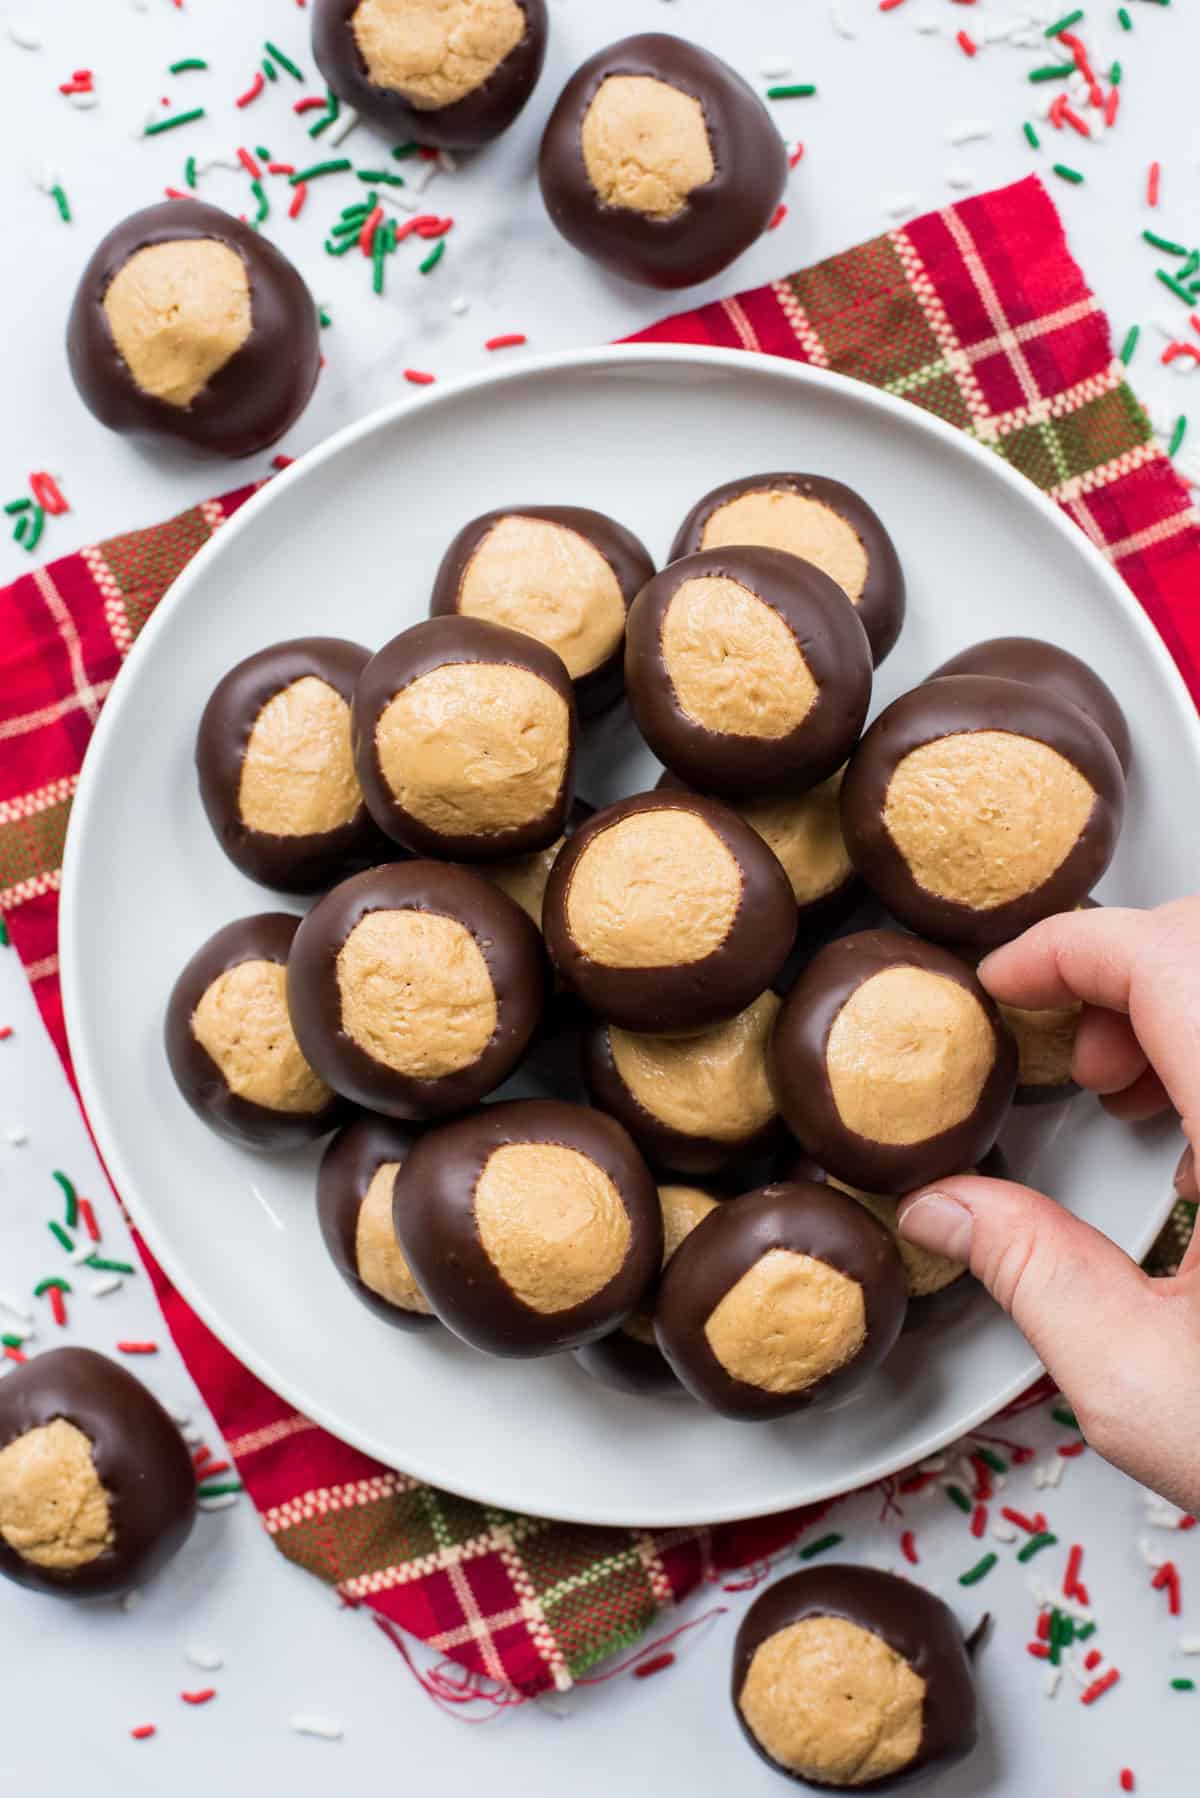 peanut butter balls on a white plate over a red striped towel on a white background